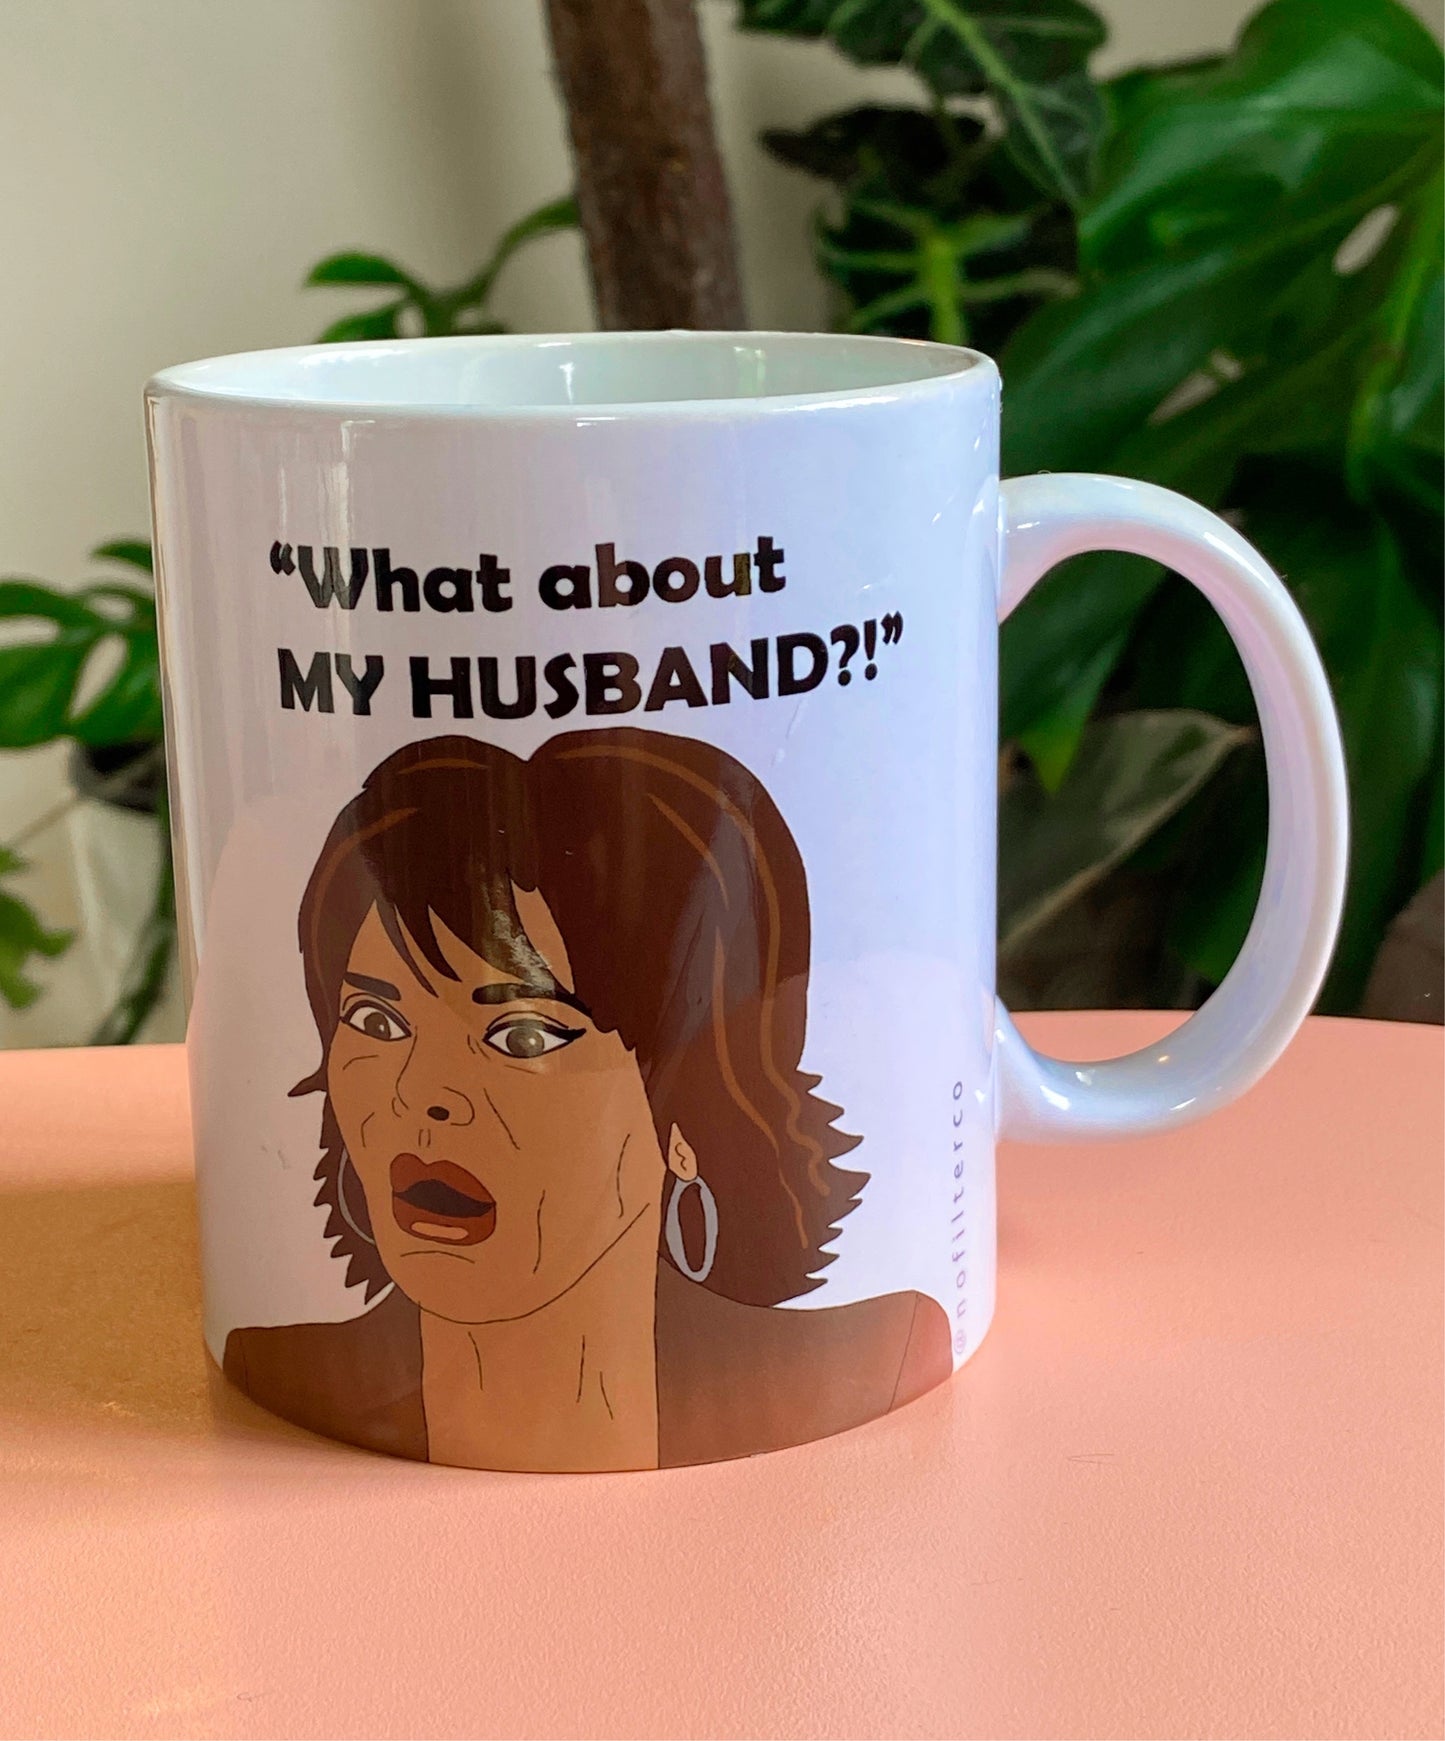 Lisa Rinna talk about the husband (real housewives of Beverly Hills mug)